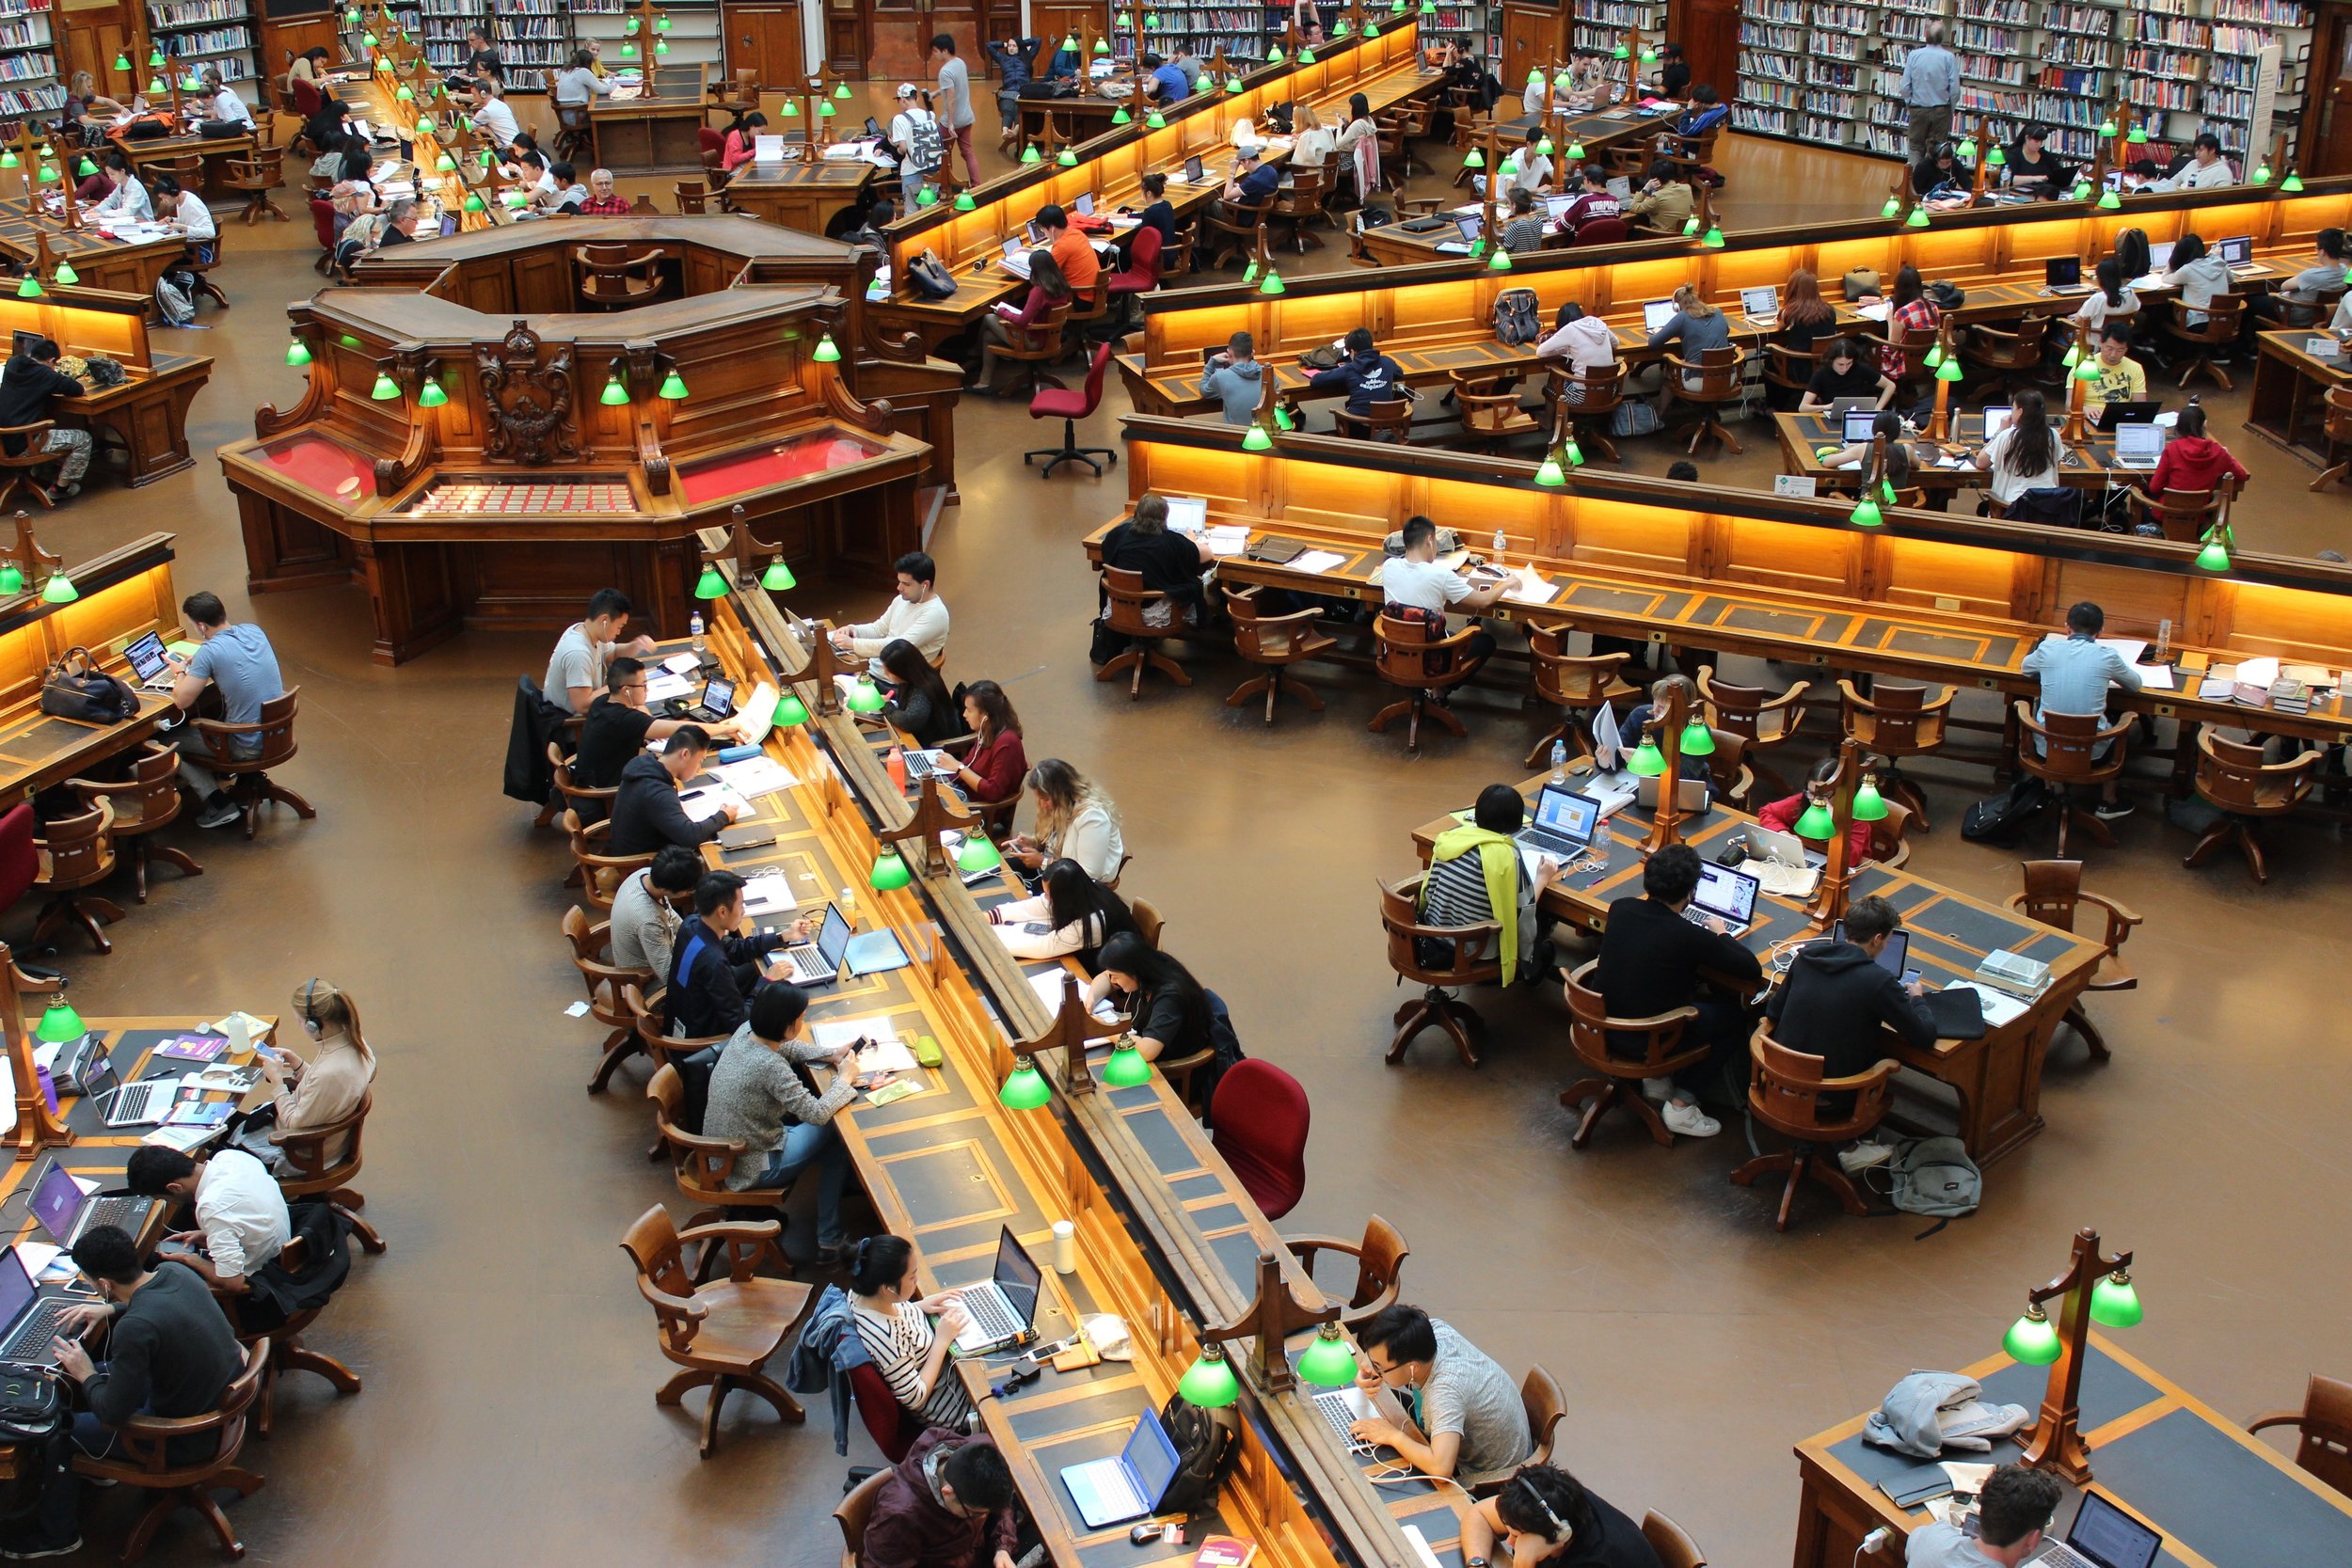 Library full of people. Photo by Pixabay on Pexels.